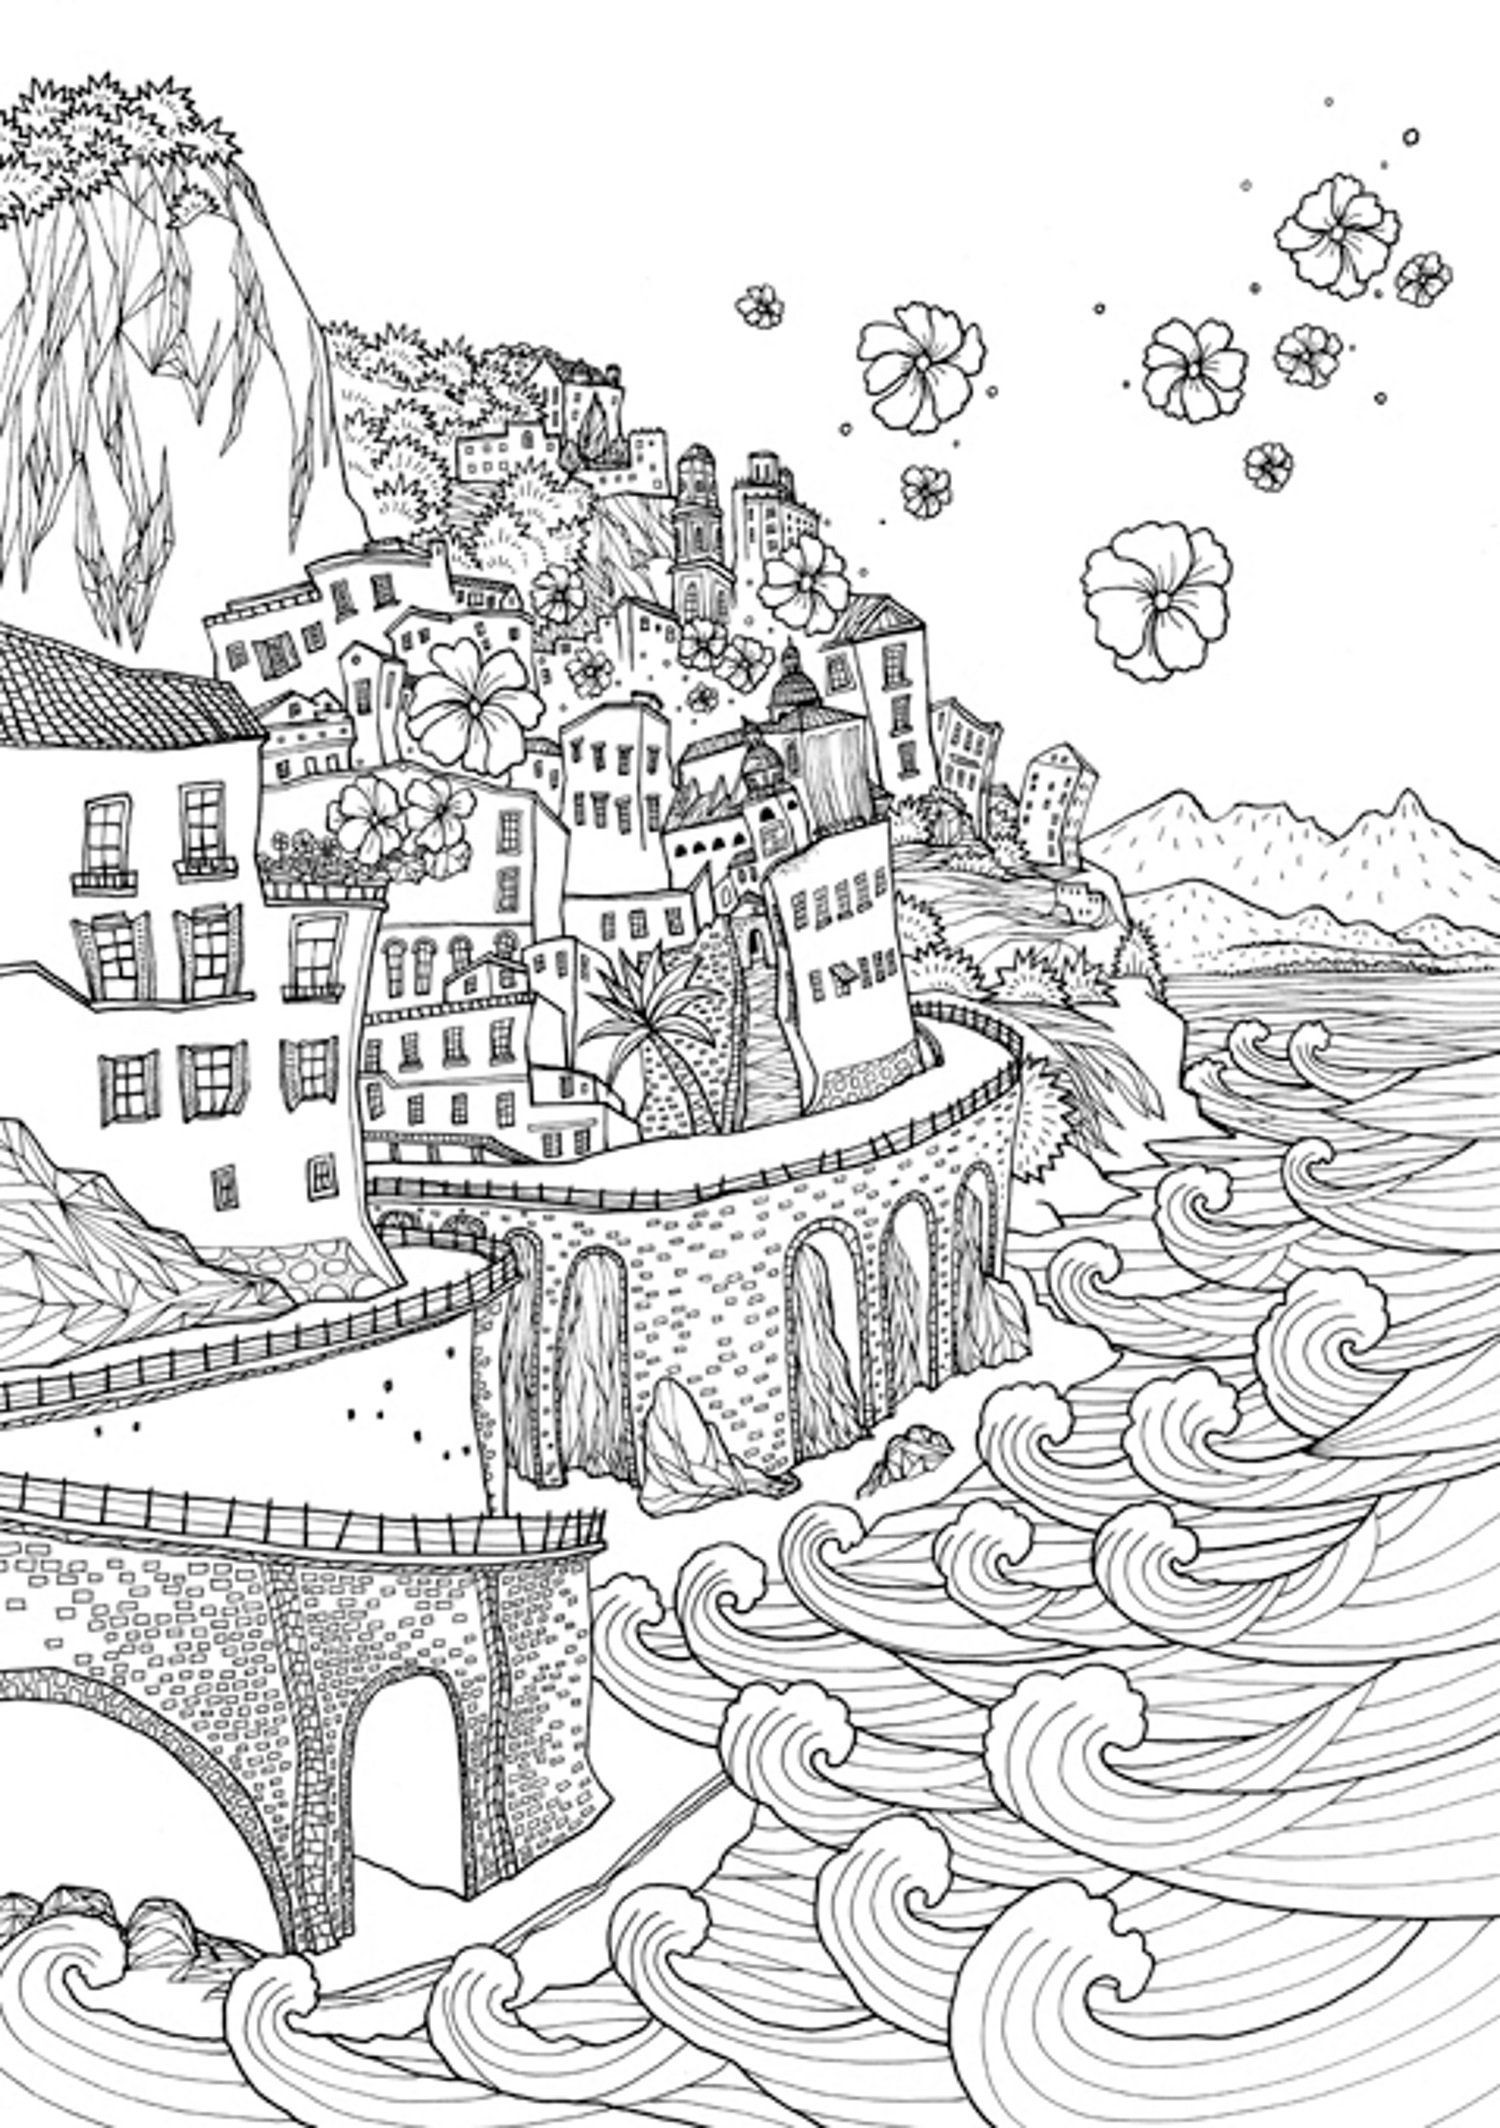 Beach Coloring Pages For Adults
 Coloring Europe Bella Italia A Coloring Book Tour of the